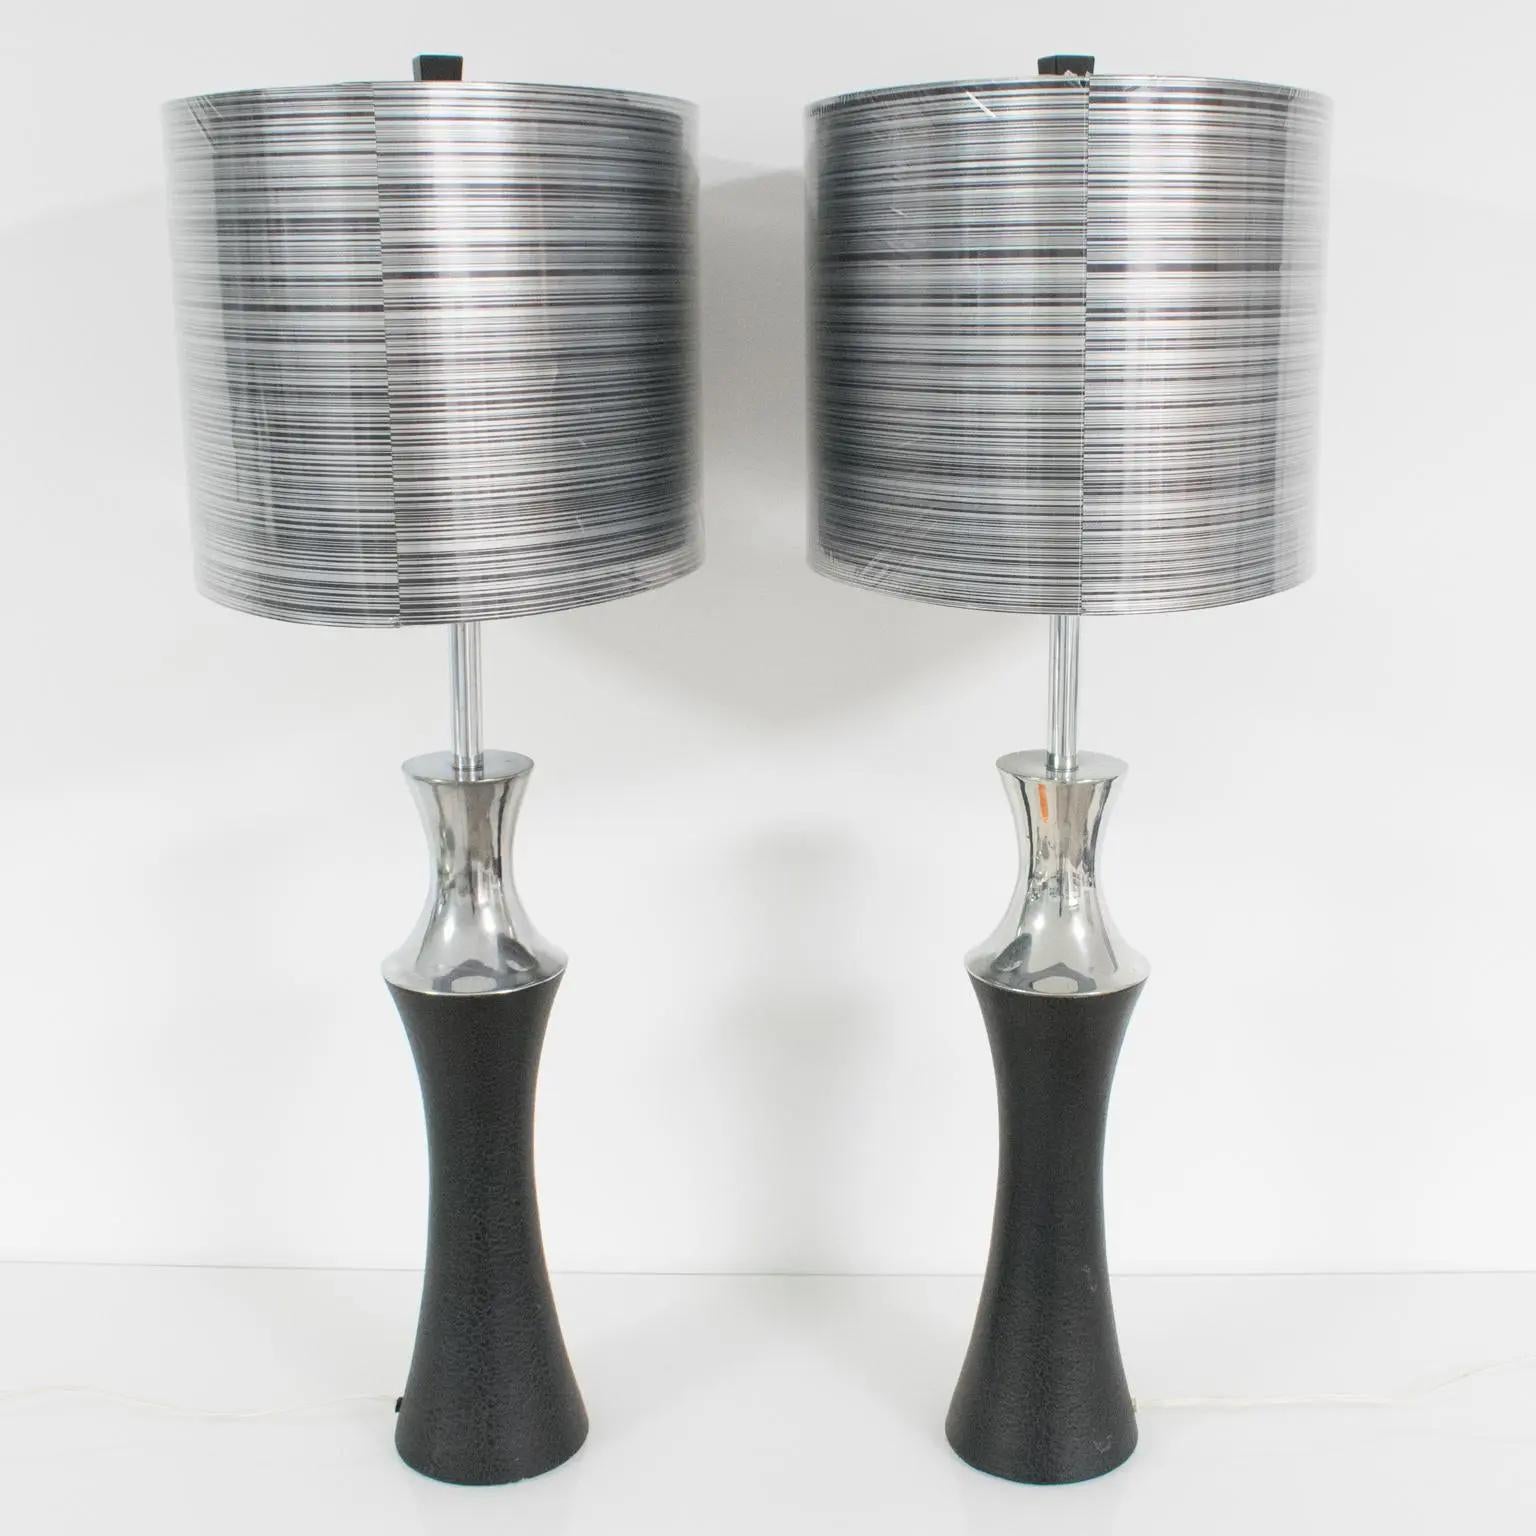 Modern Mutual Sunset Aluminum Table Lamp, a pair, 1960s For Sale